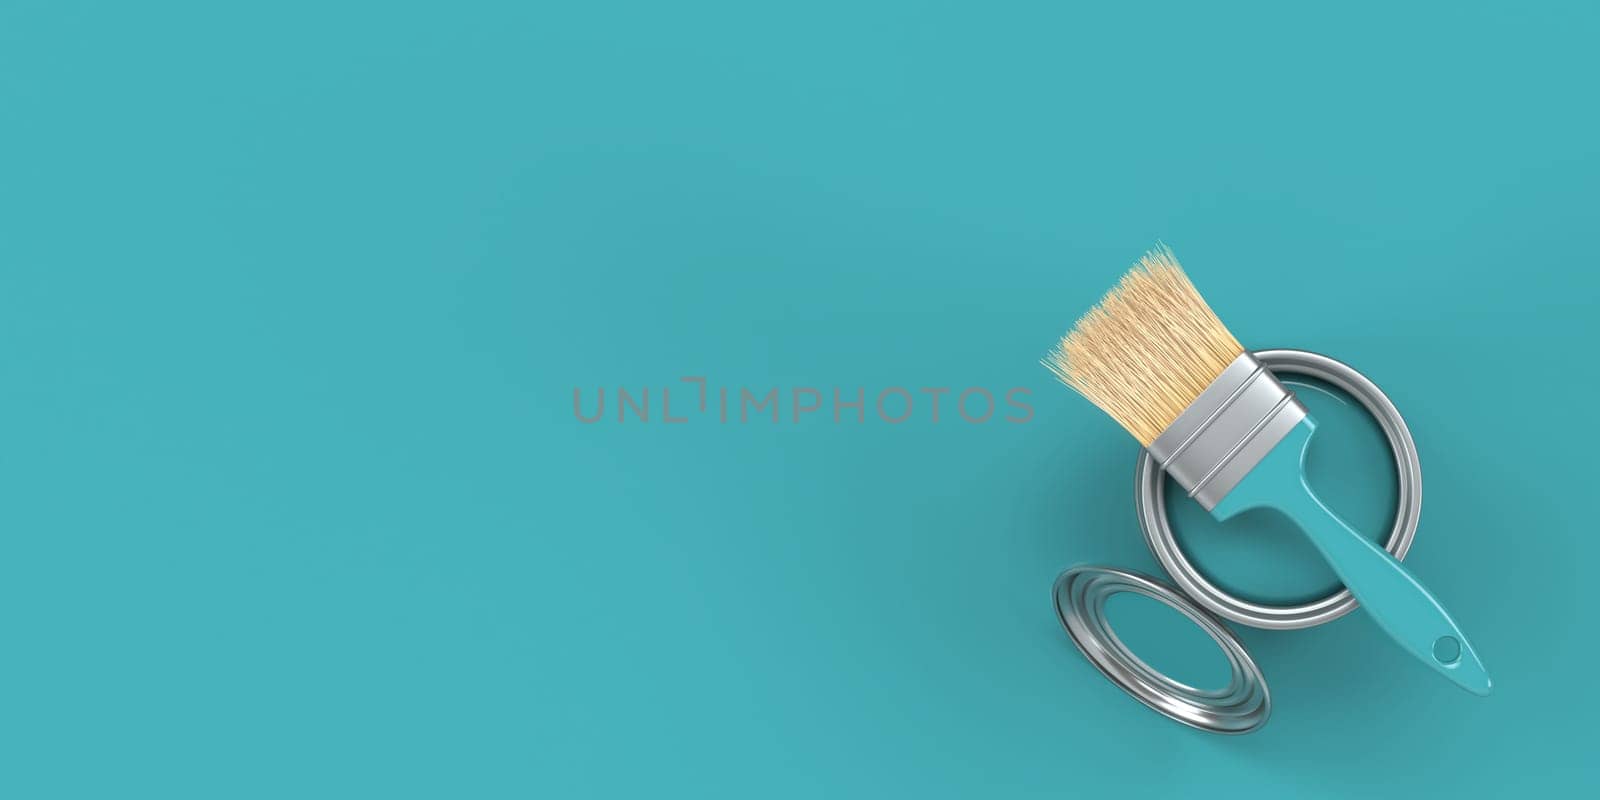 Painting brush on metal tin 3D rendering illustration isolated on blue background